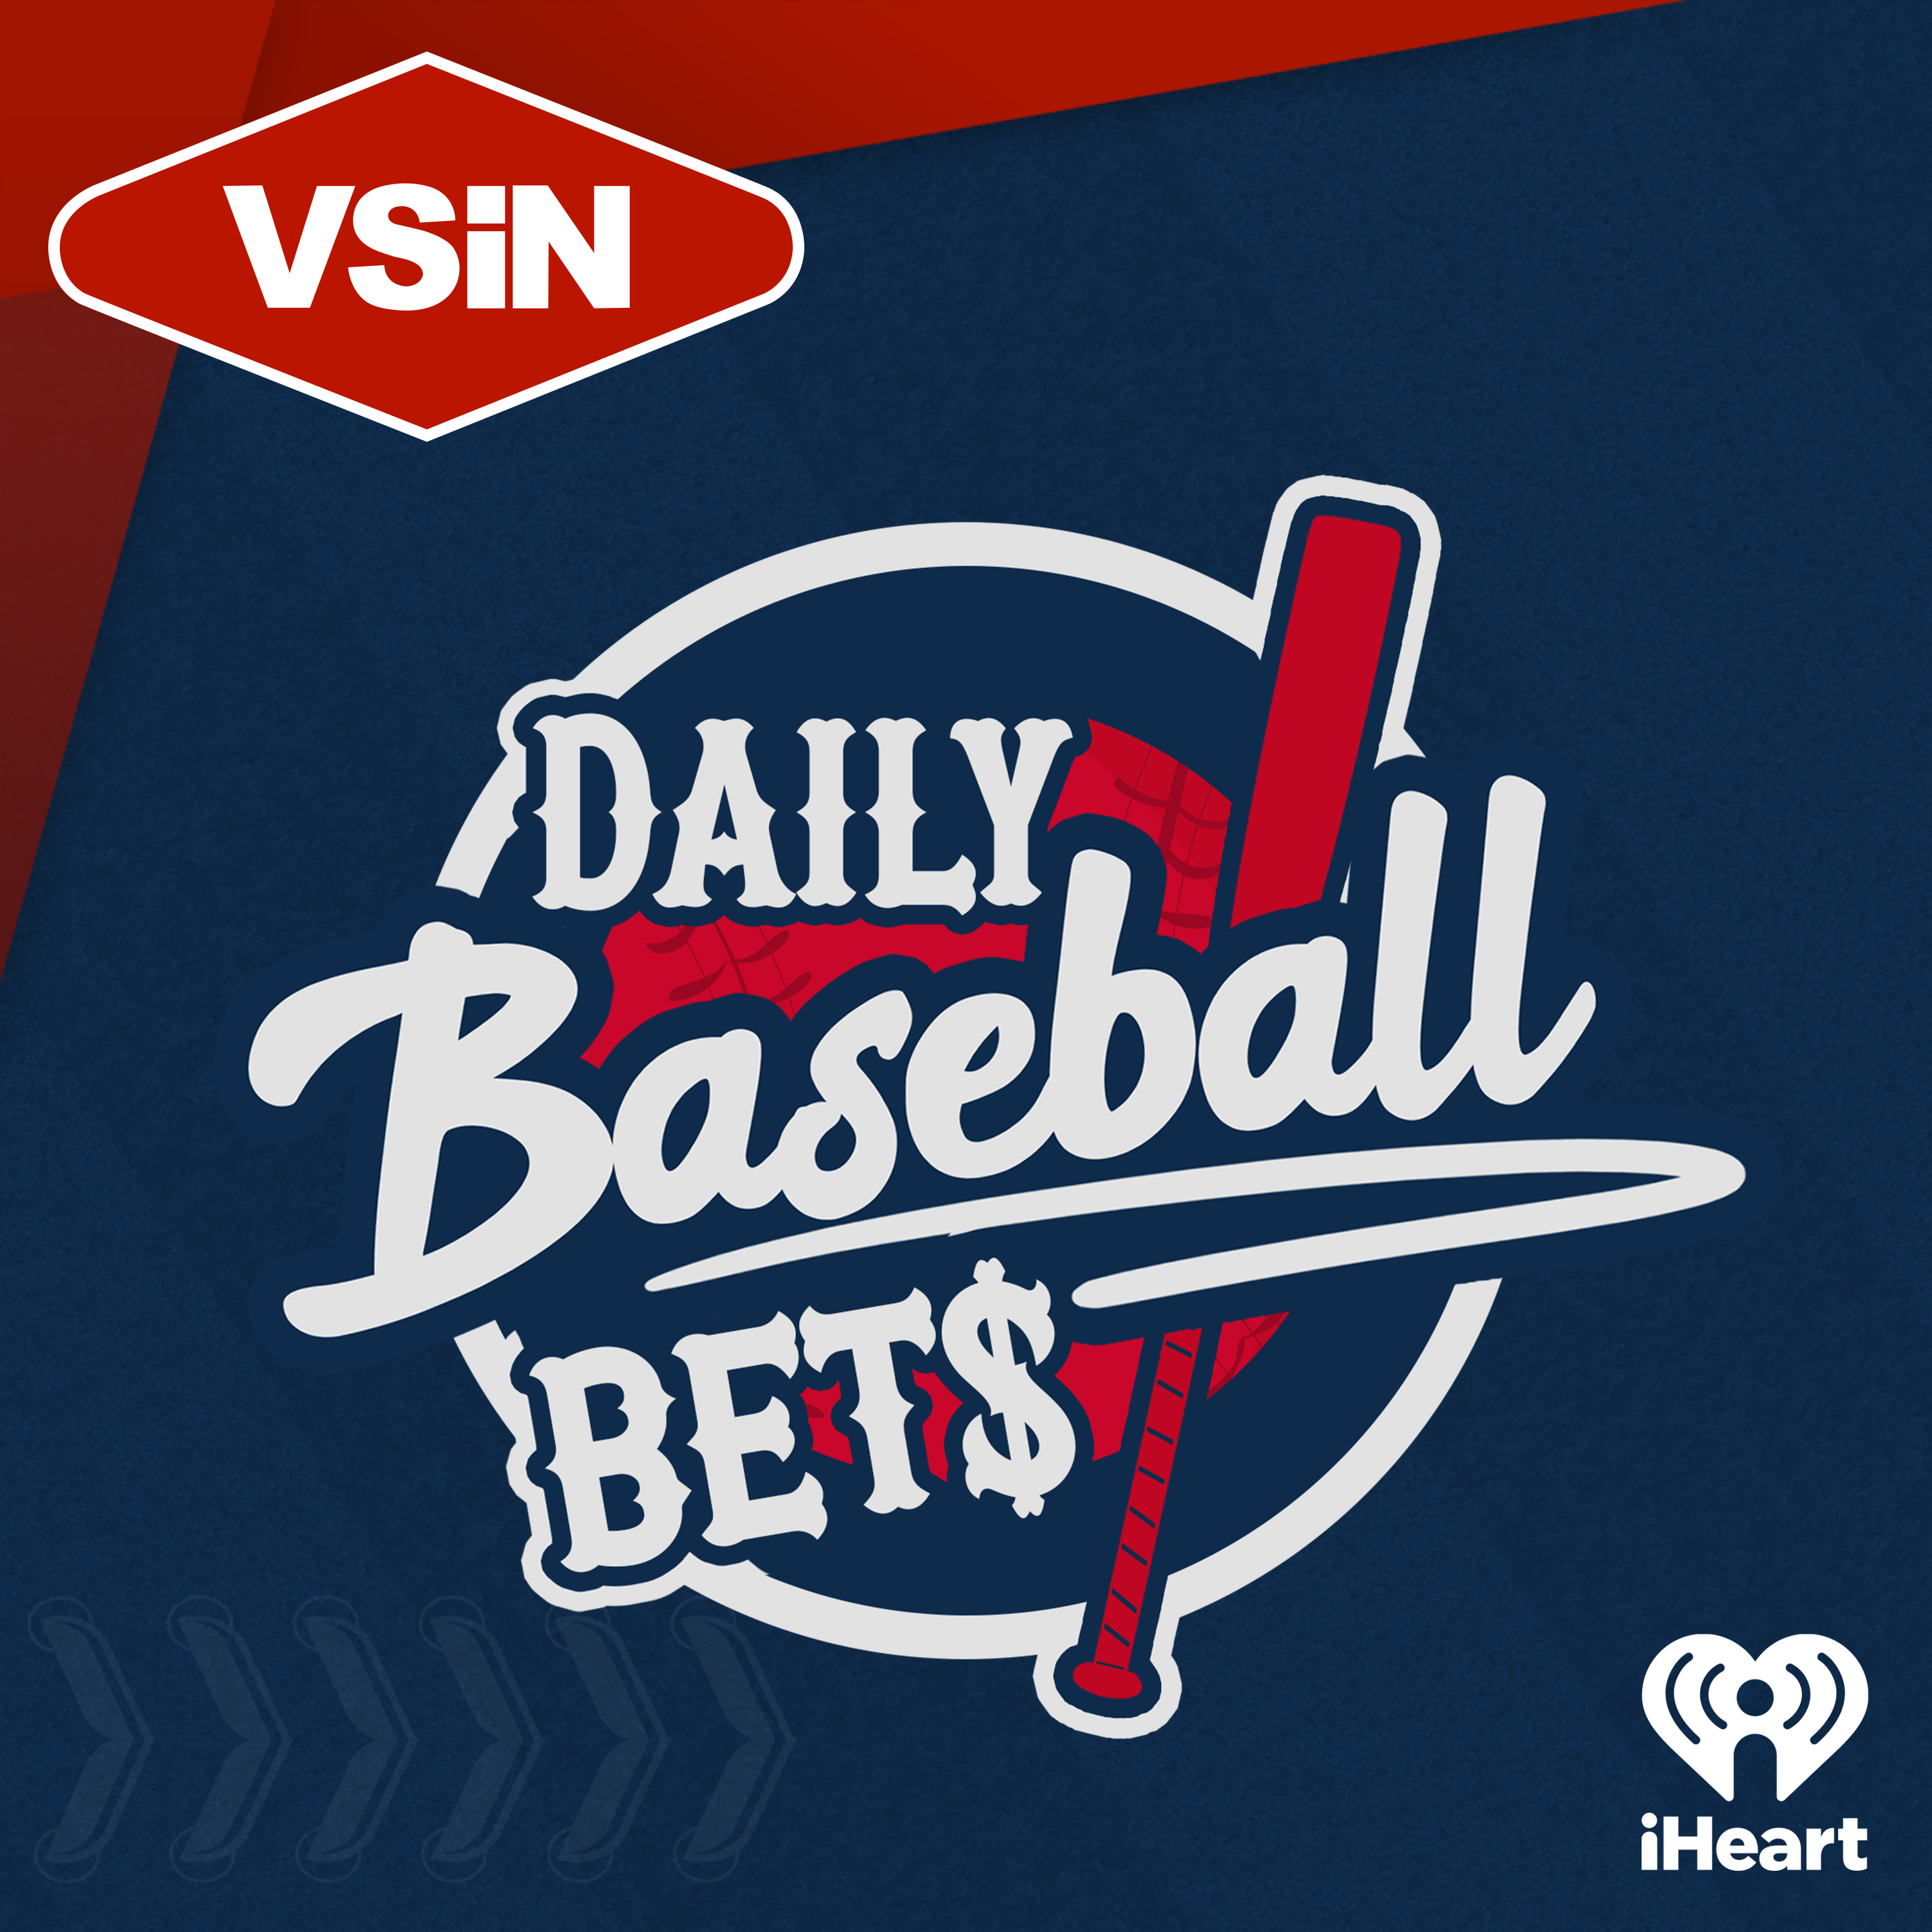 MLB team tendencies can pay off after All-Star break - VSiN Exclusive News  - News